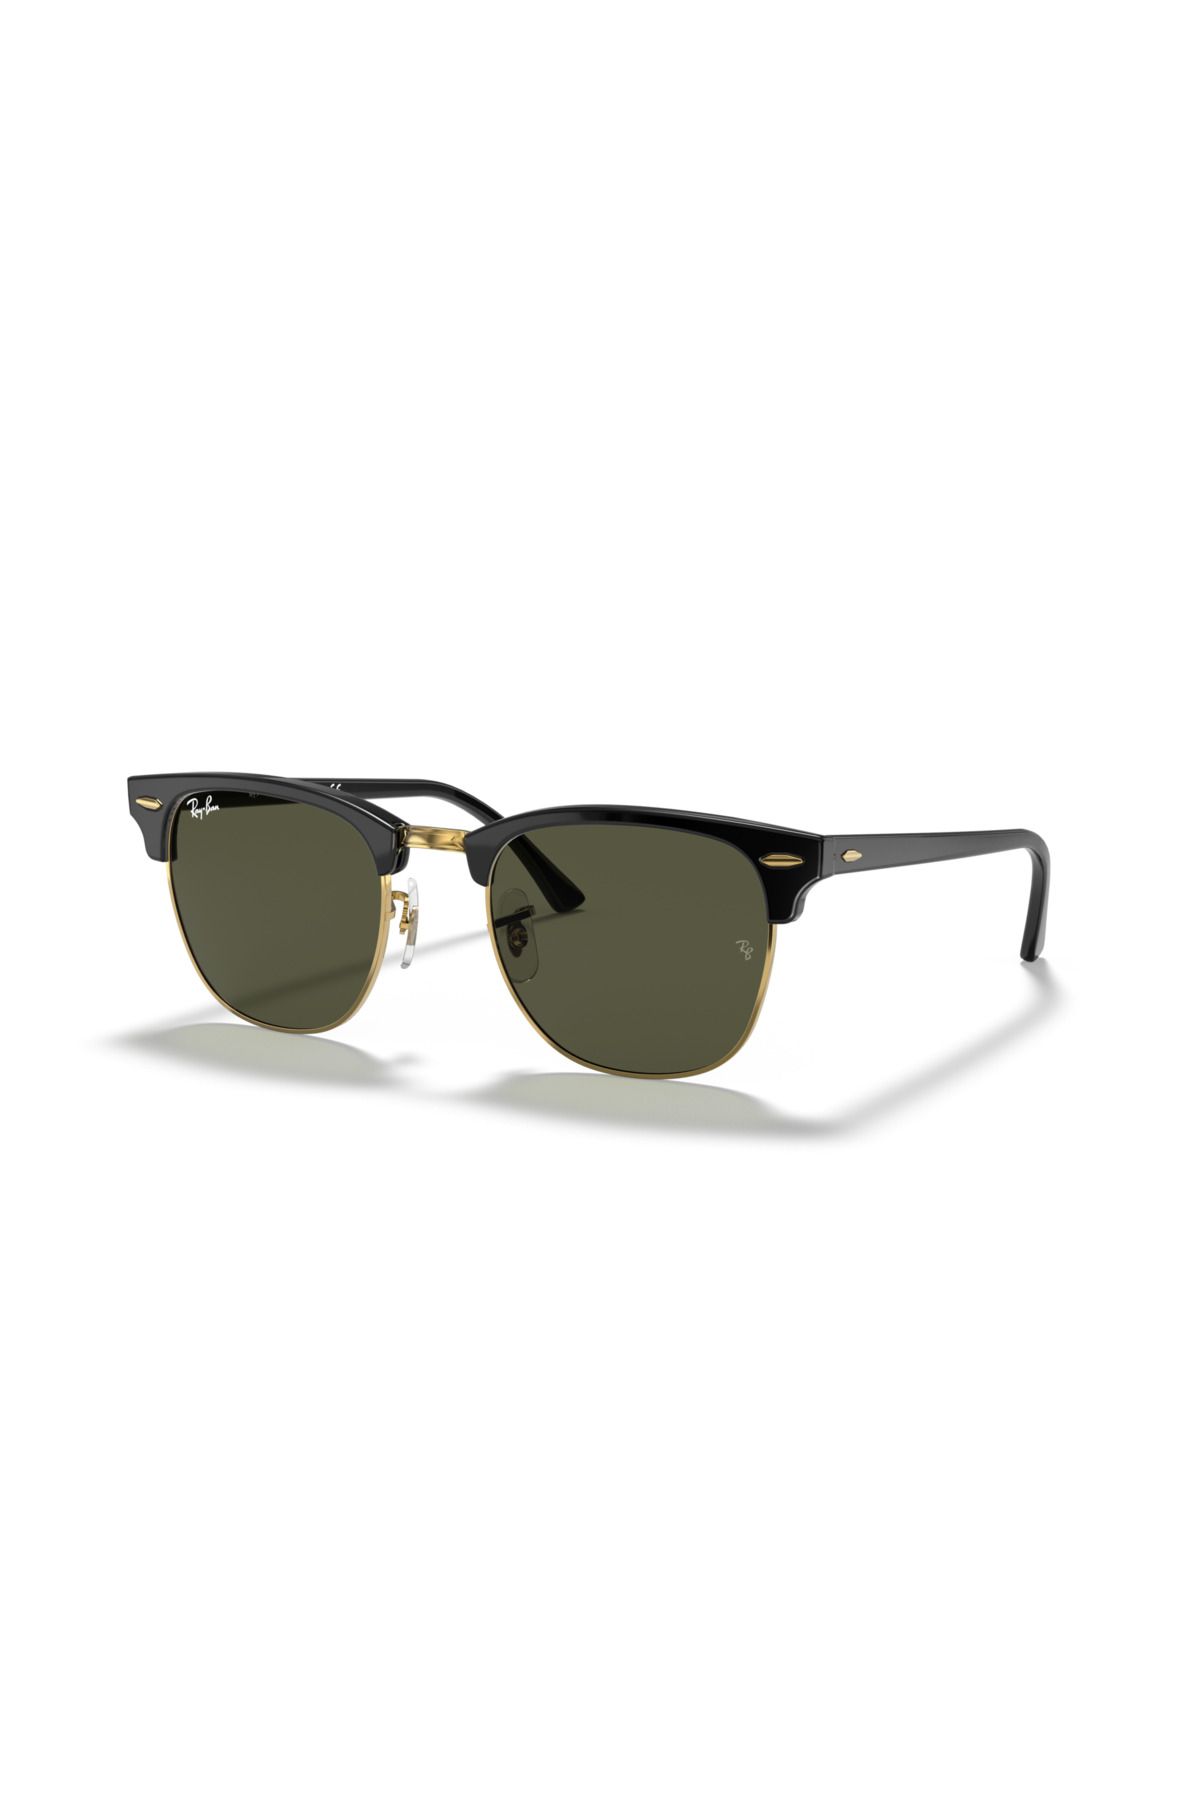 Ray-Ban Rb3016 W0365 49 Clubmaster